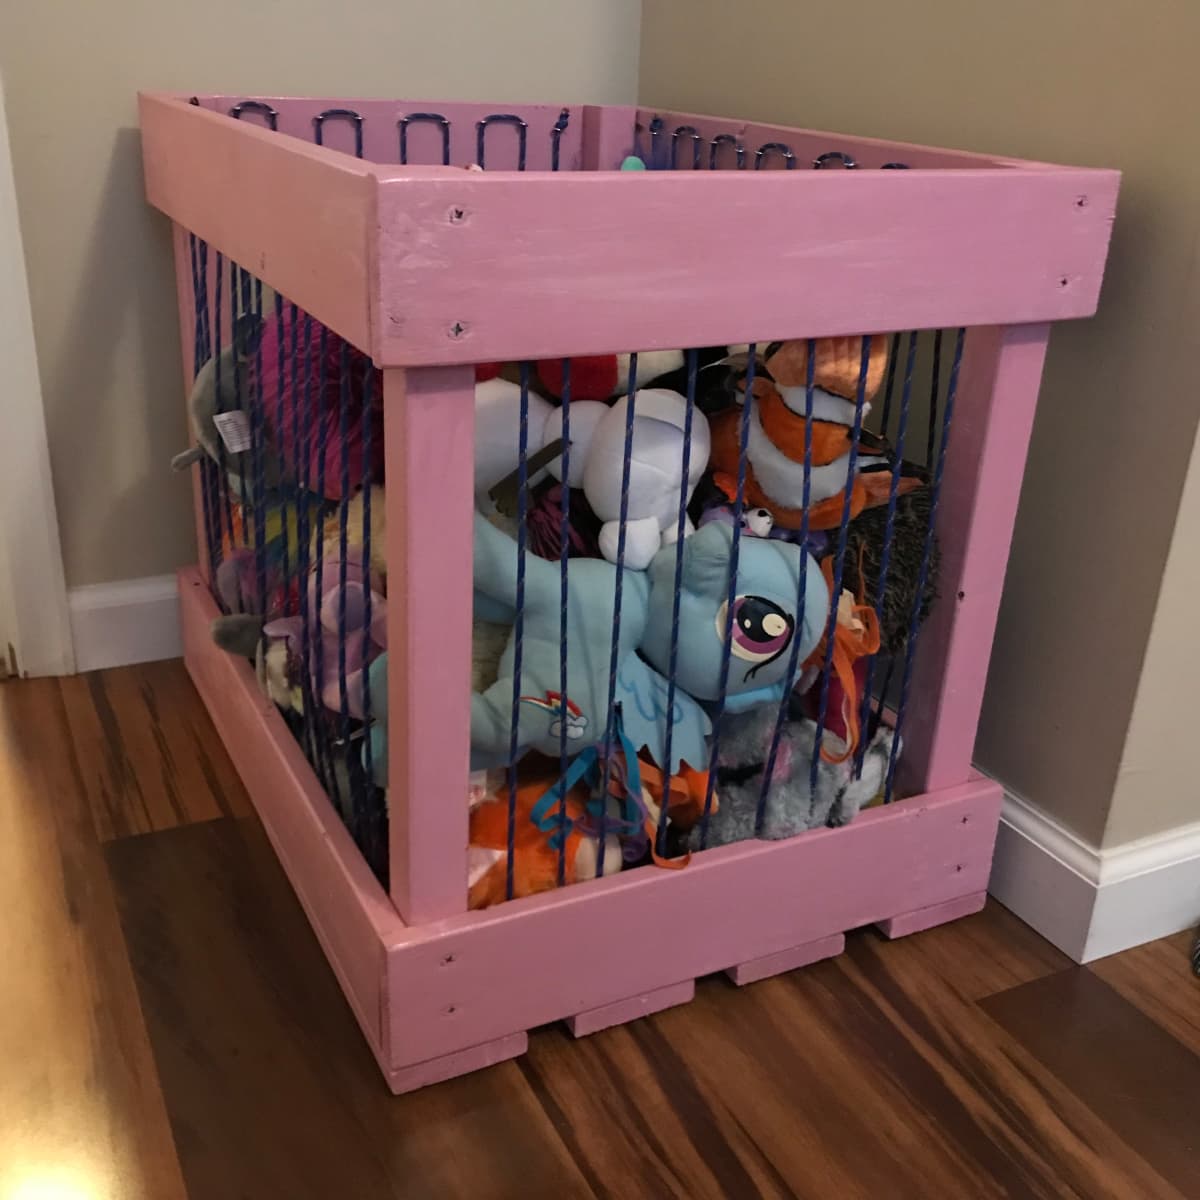 How to Build a Stuffed Animal Storage Cage - FeltMagnet